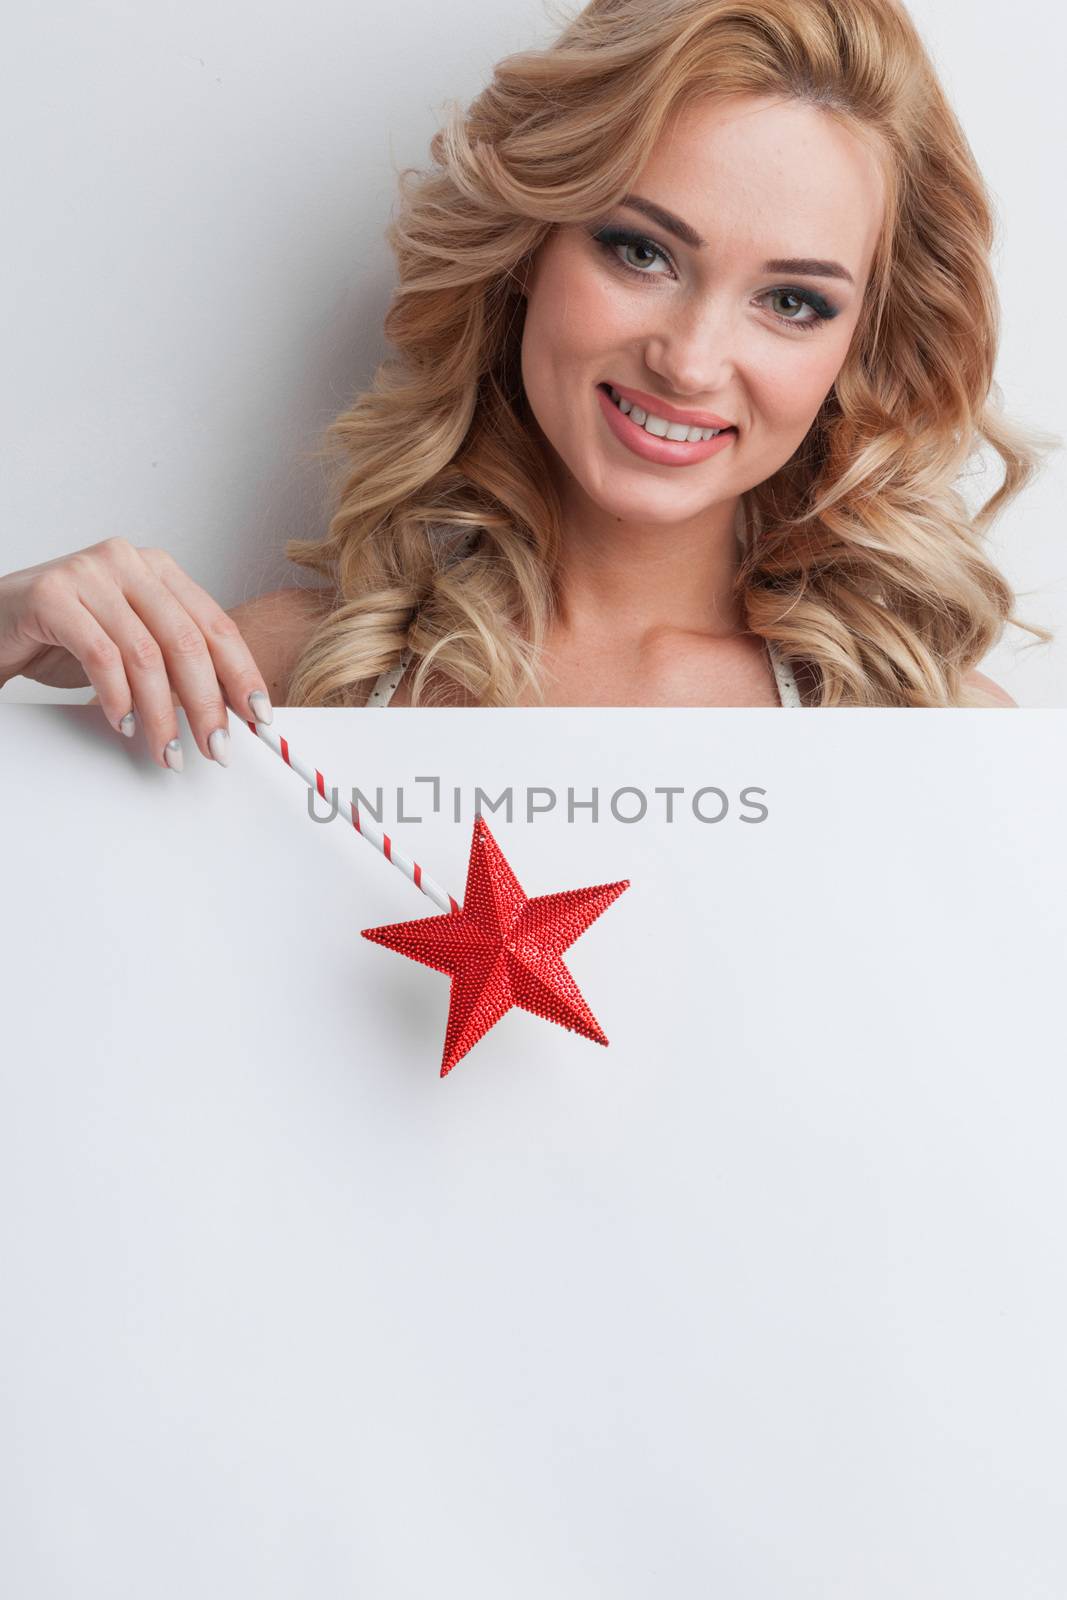 Fairy woman with magic wand with star pointing at white background with copy space for text